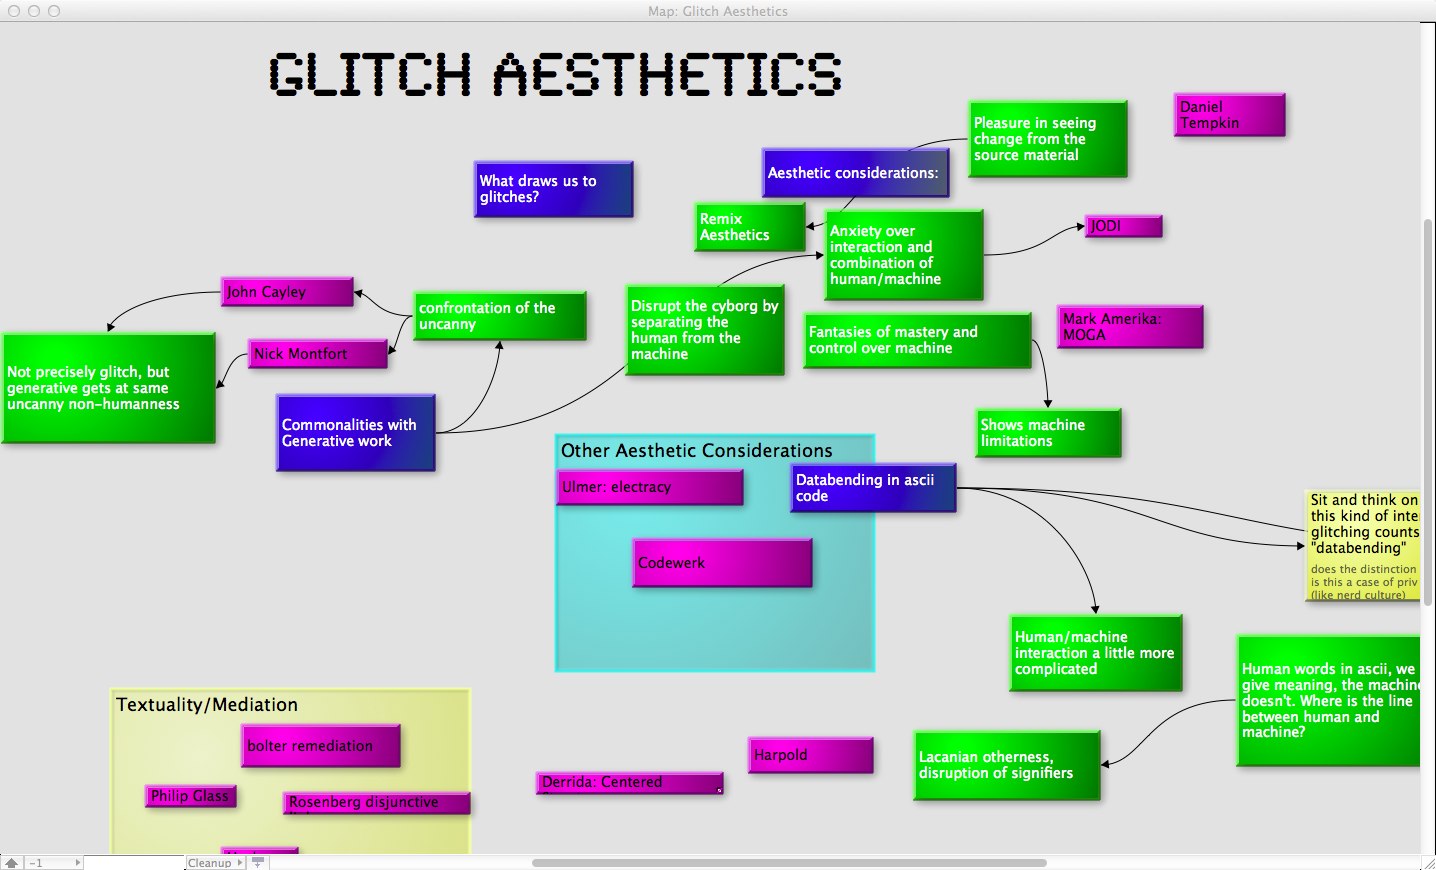 Drawing on research on remix aesthetics, Codewerk, art theory, literary theory, and poststructuralism, Stacey explores the nature of glitch art and the aesthetics of intentional glitching...